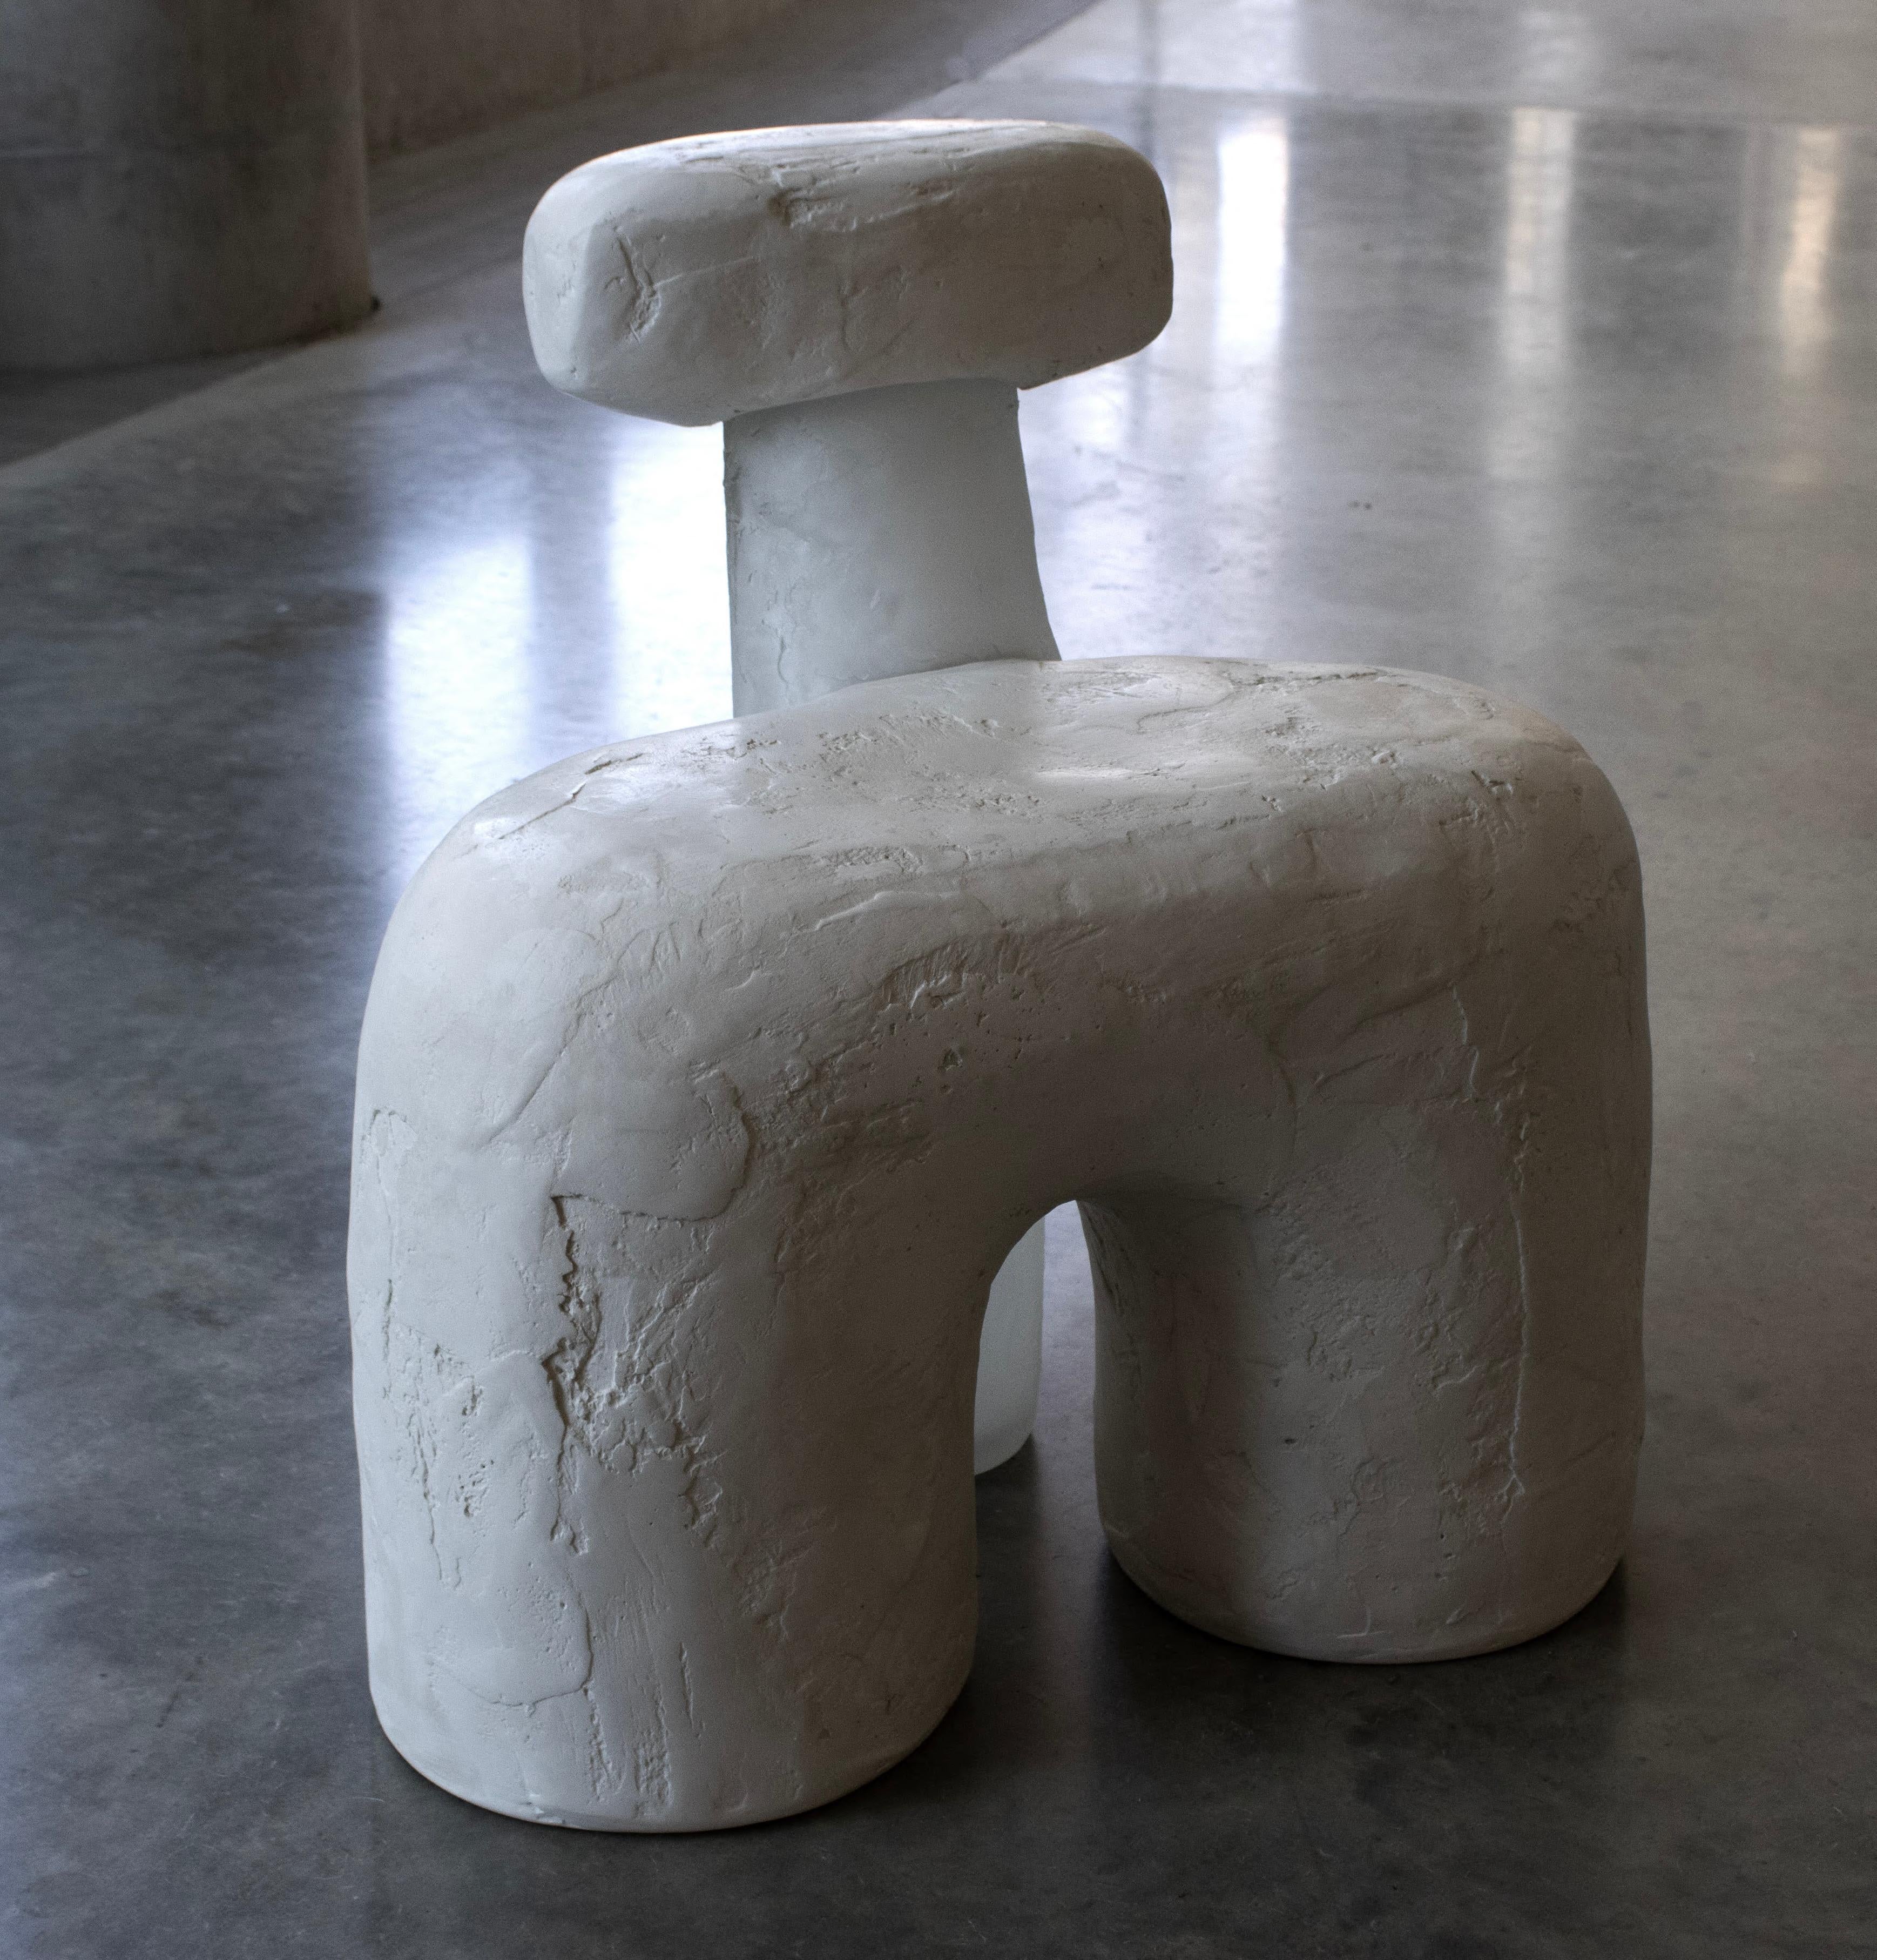 The Marrow Chair is a three-legged side chair. Monolithic in it's weighted stance, the materials of glass in hydrocal act in tandem with each other rather than in contrast, to oscillate in and out of opacity and presence. The spackle texture of both